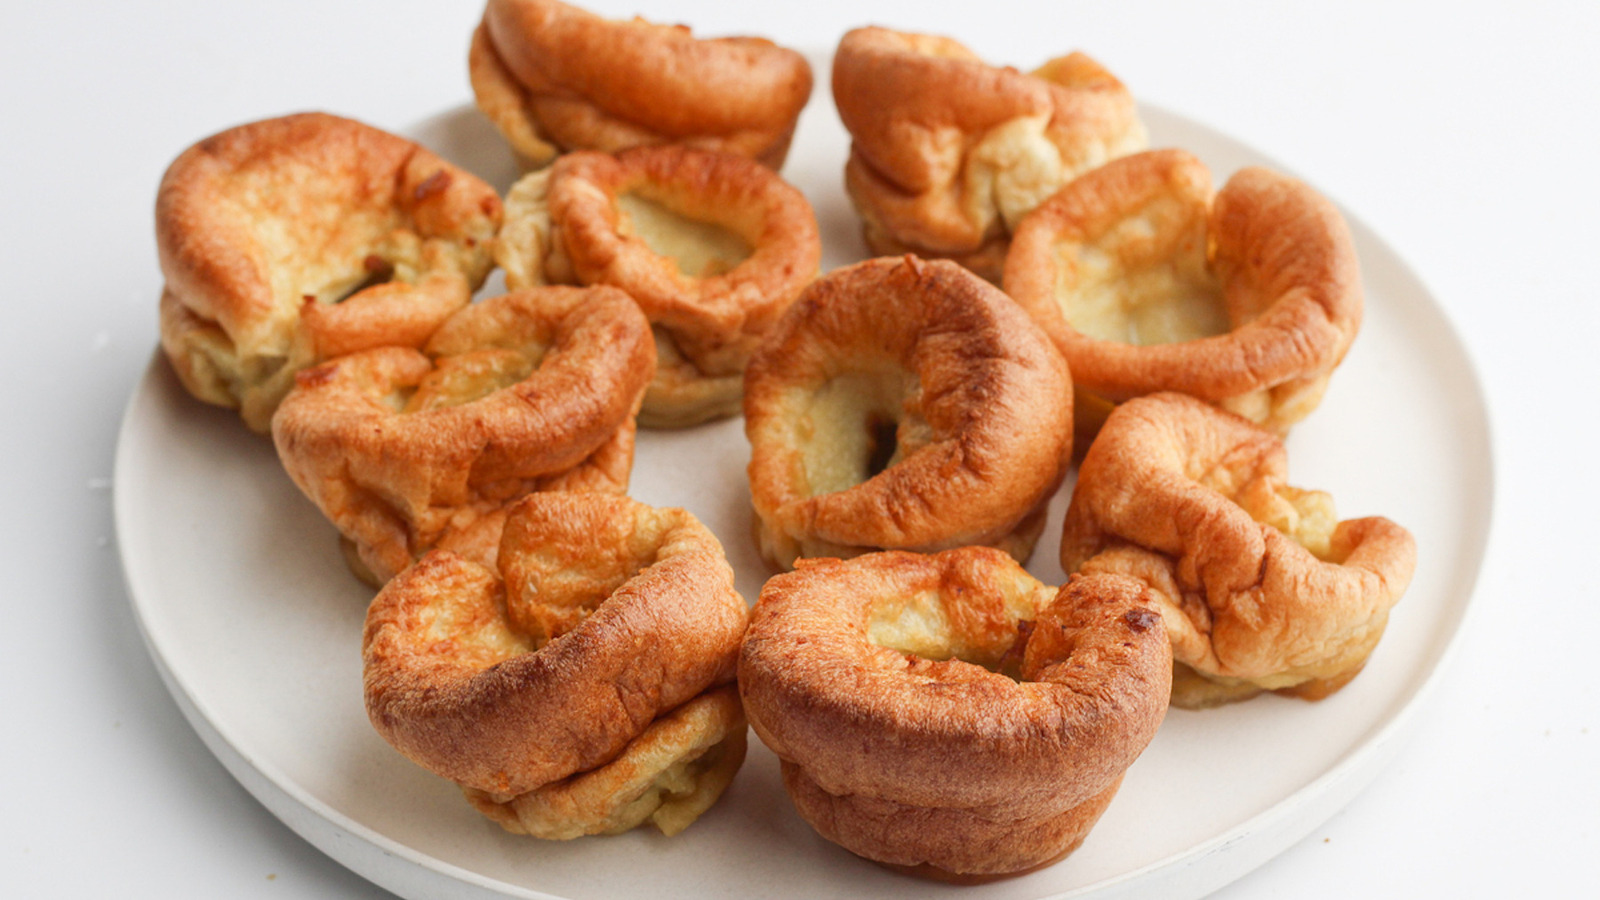 https://www.mashed.com/img/gallery/traditional-yorkshire-pudding-recipe/l-intro-1634149911.jpg